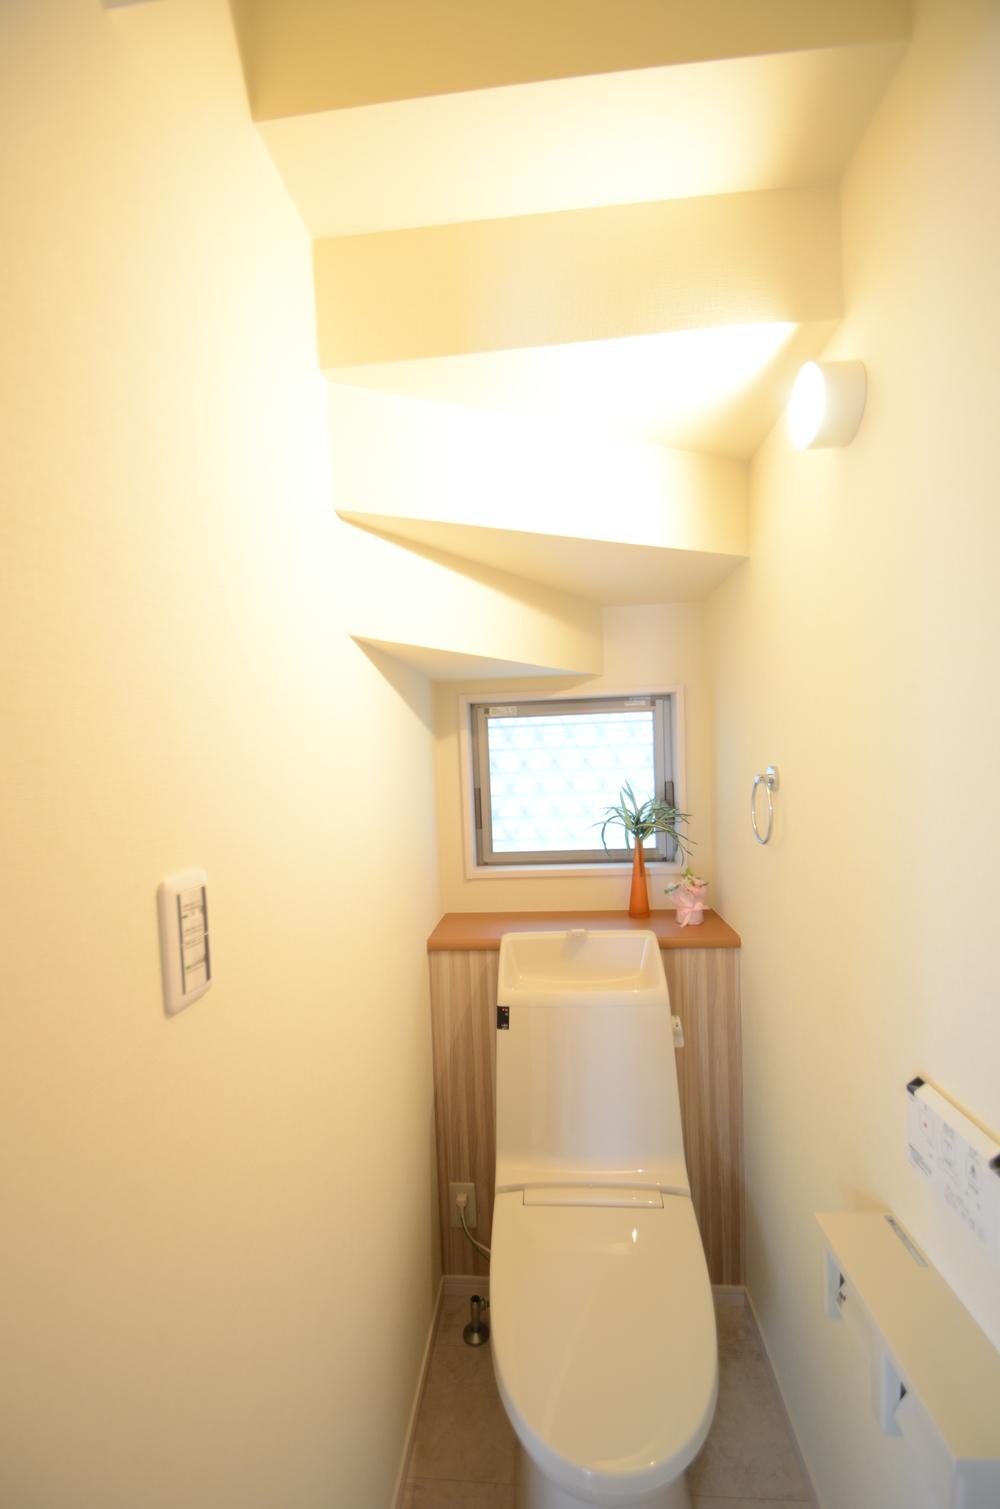 Toilet. There is a toilet under the stairs. Also devised that does not interfere with the path to the lavatory in the folding door of the door.